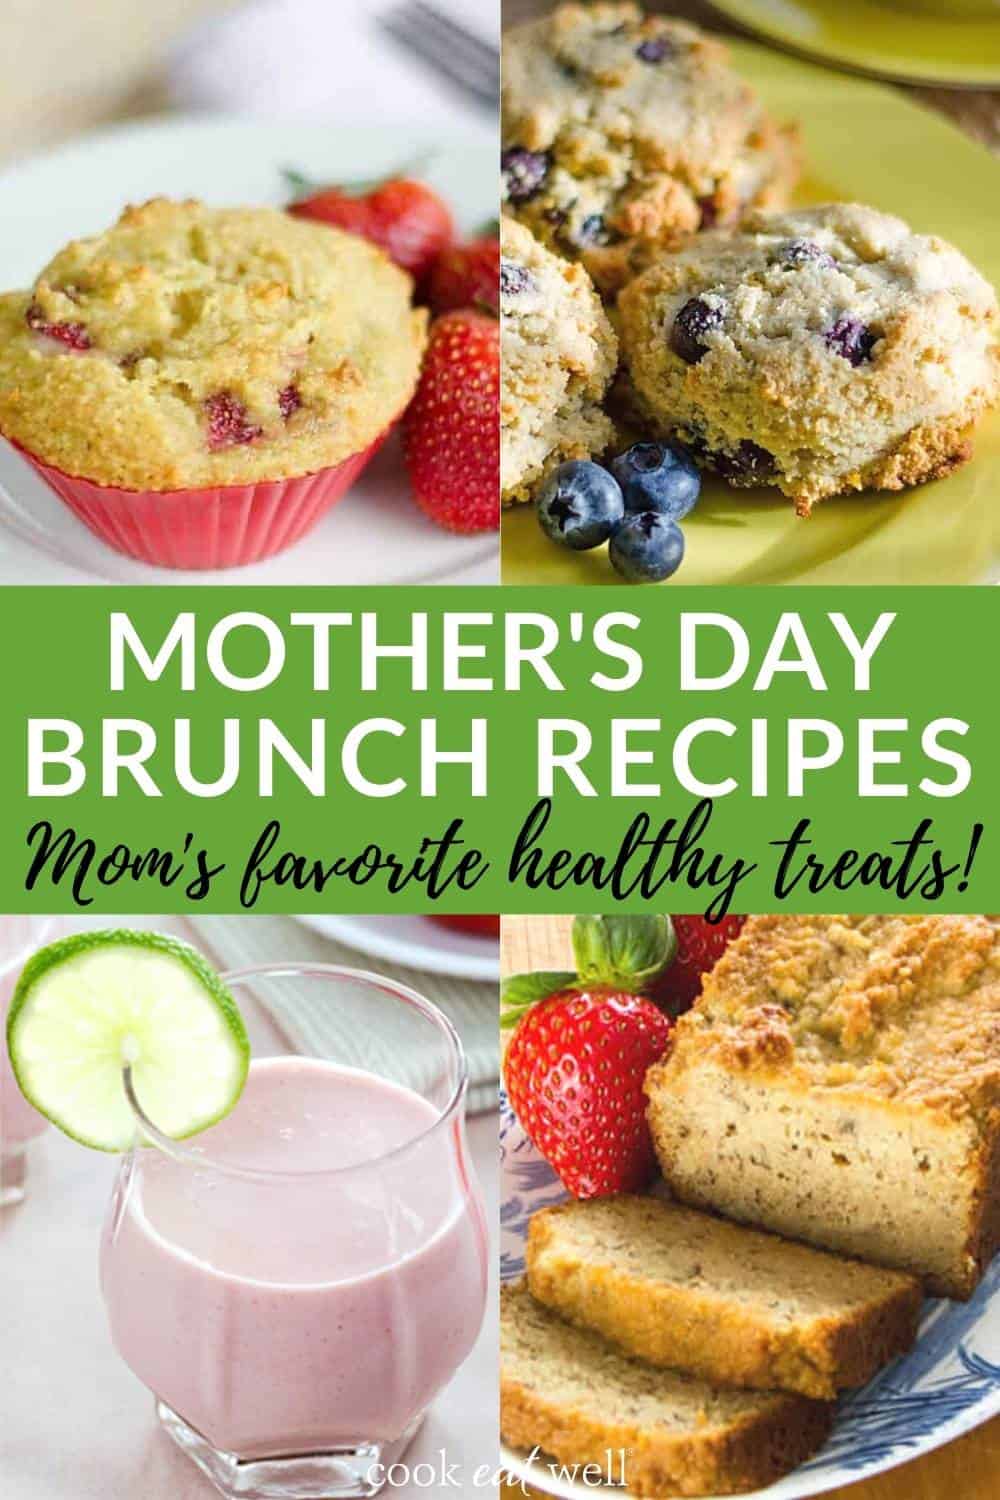 Healthy Mother's Day Brunch and Dinner Recipes - Cook Eat Well